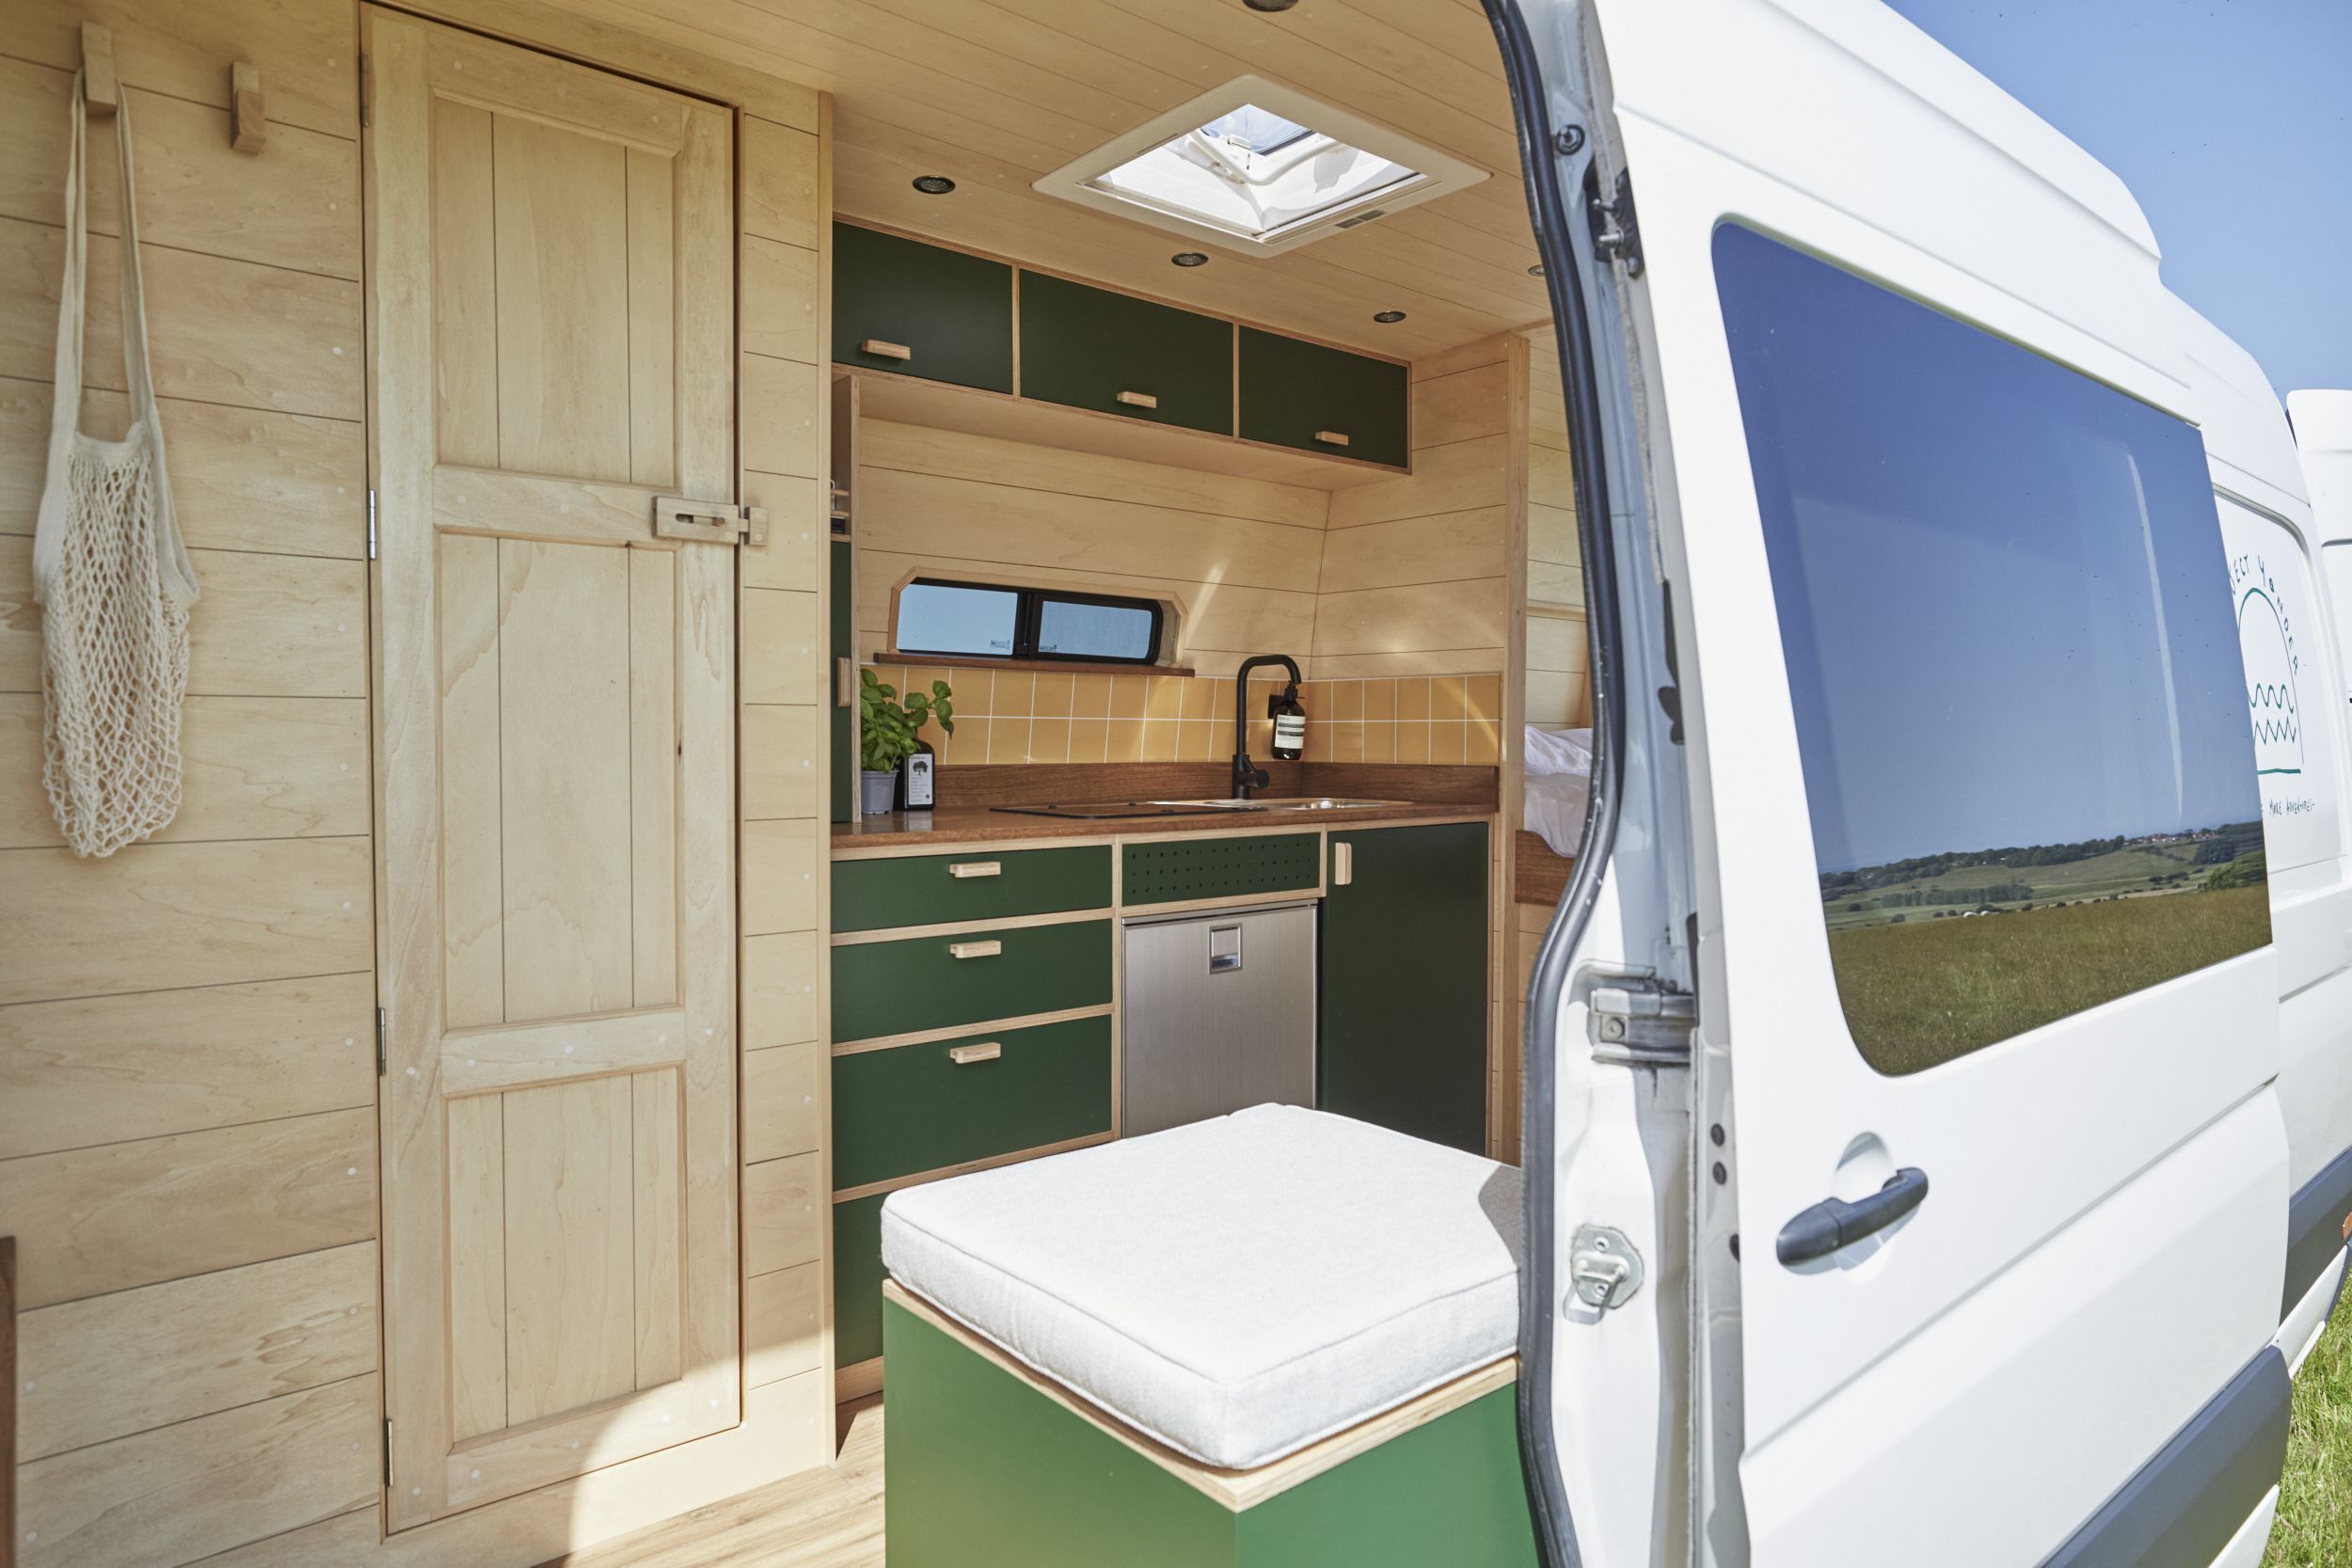 This Couple Tiny Homes on Wheels - Camper Van Conversions